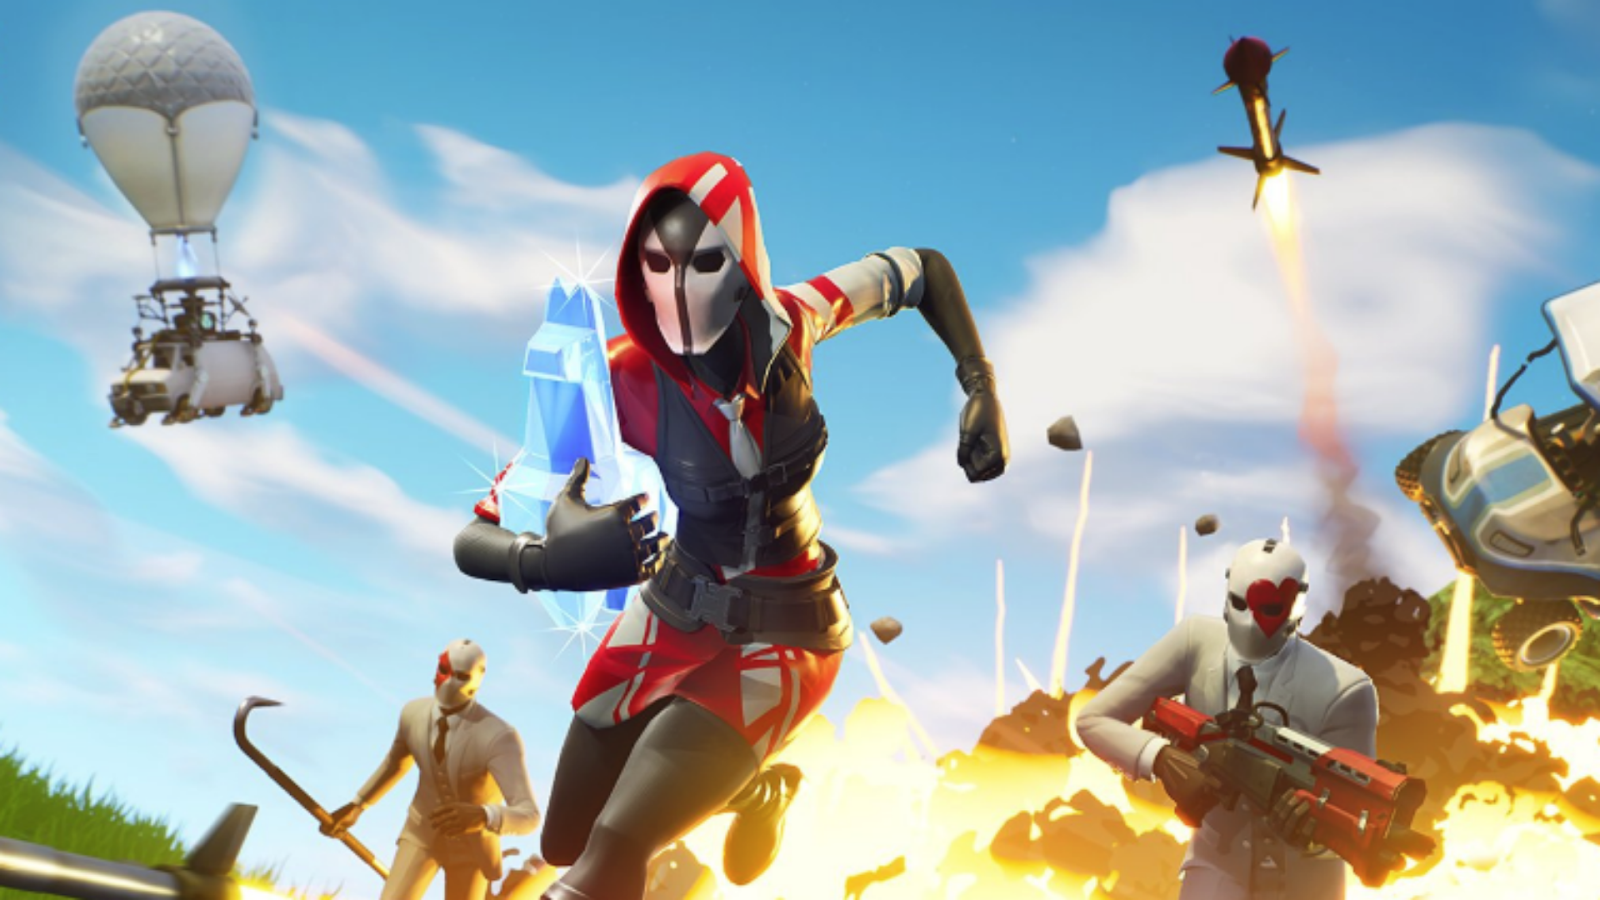 Fortnite Fun Challenges - Can You Get Free V Bucks Without ... - 1600 x 900 png 1135kB